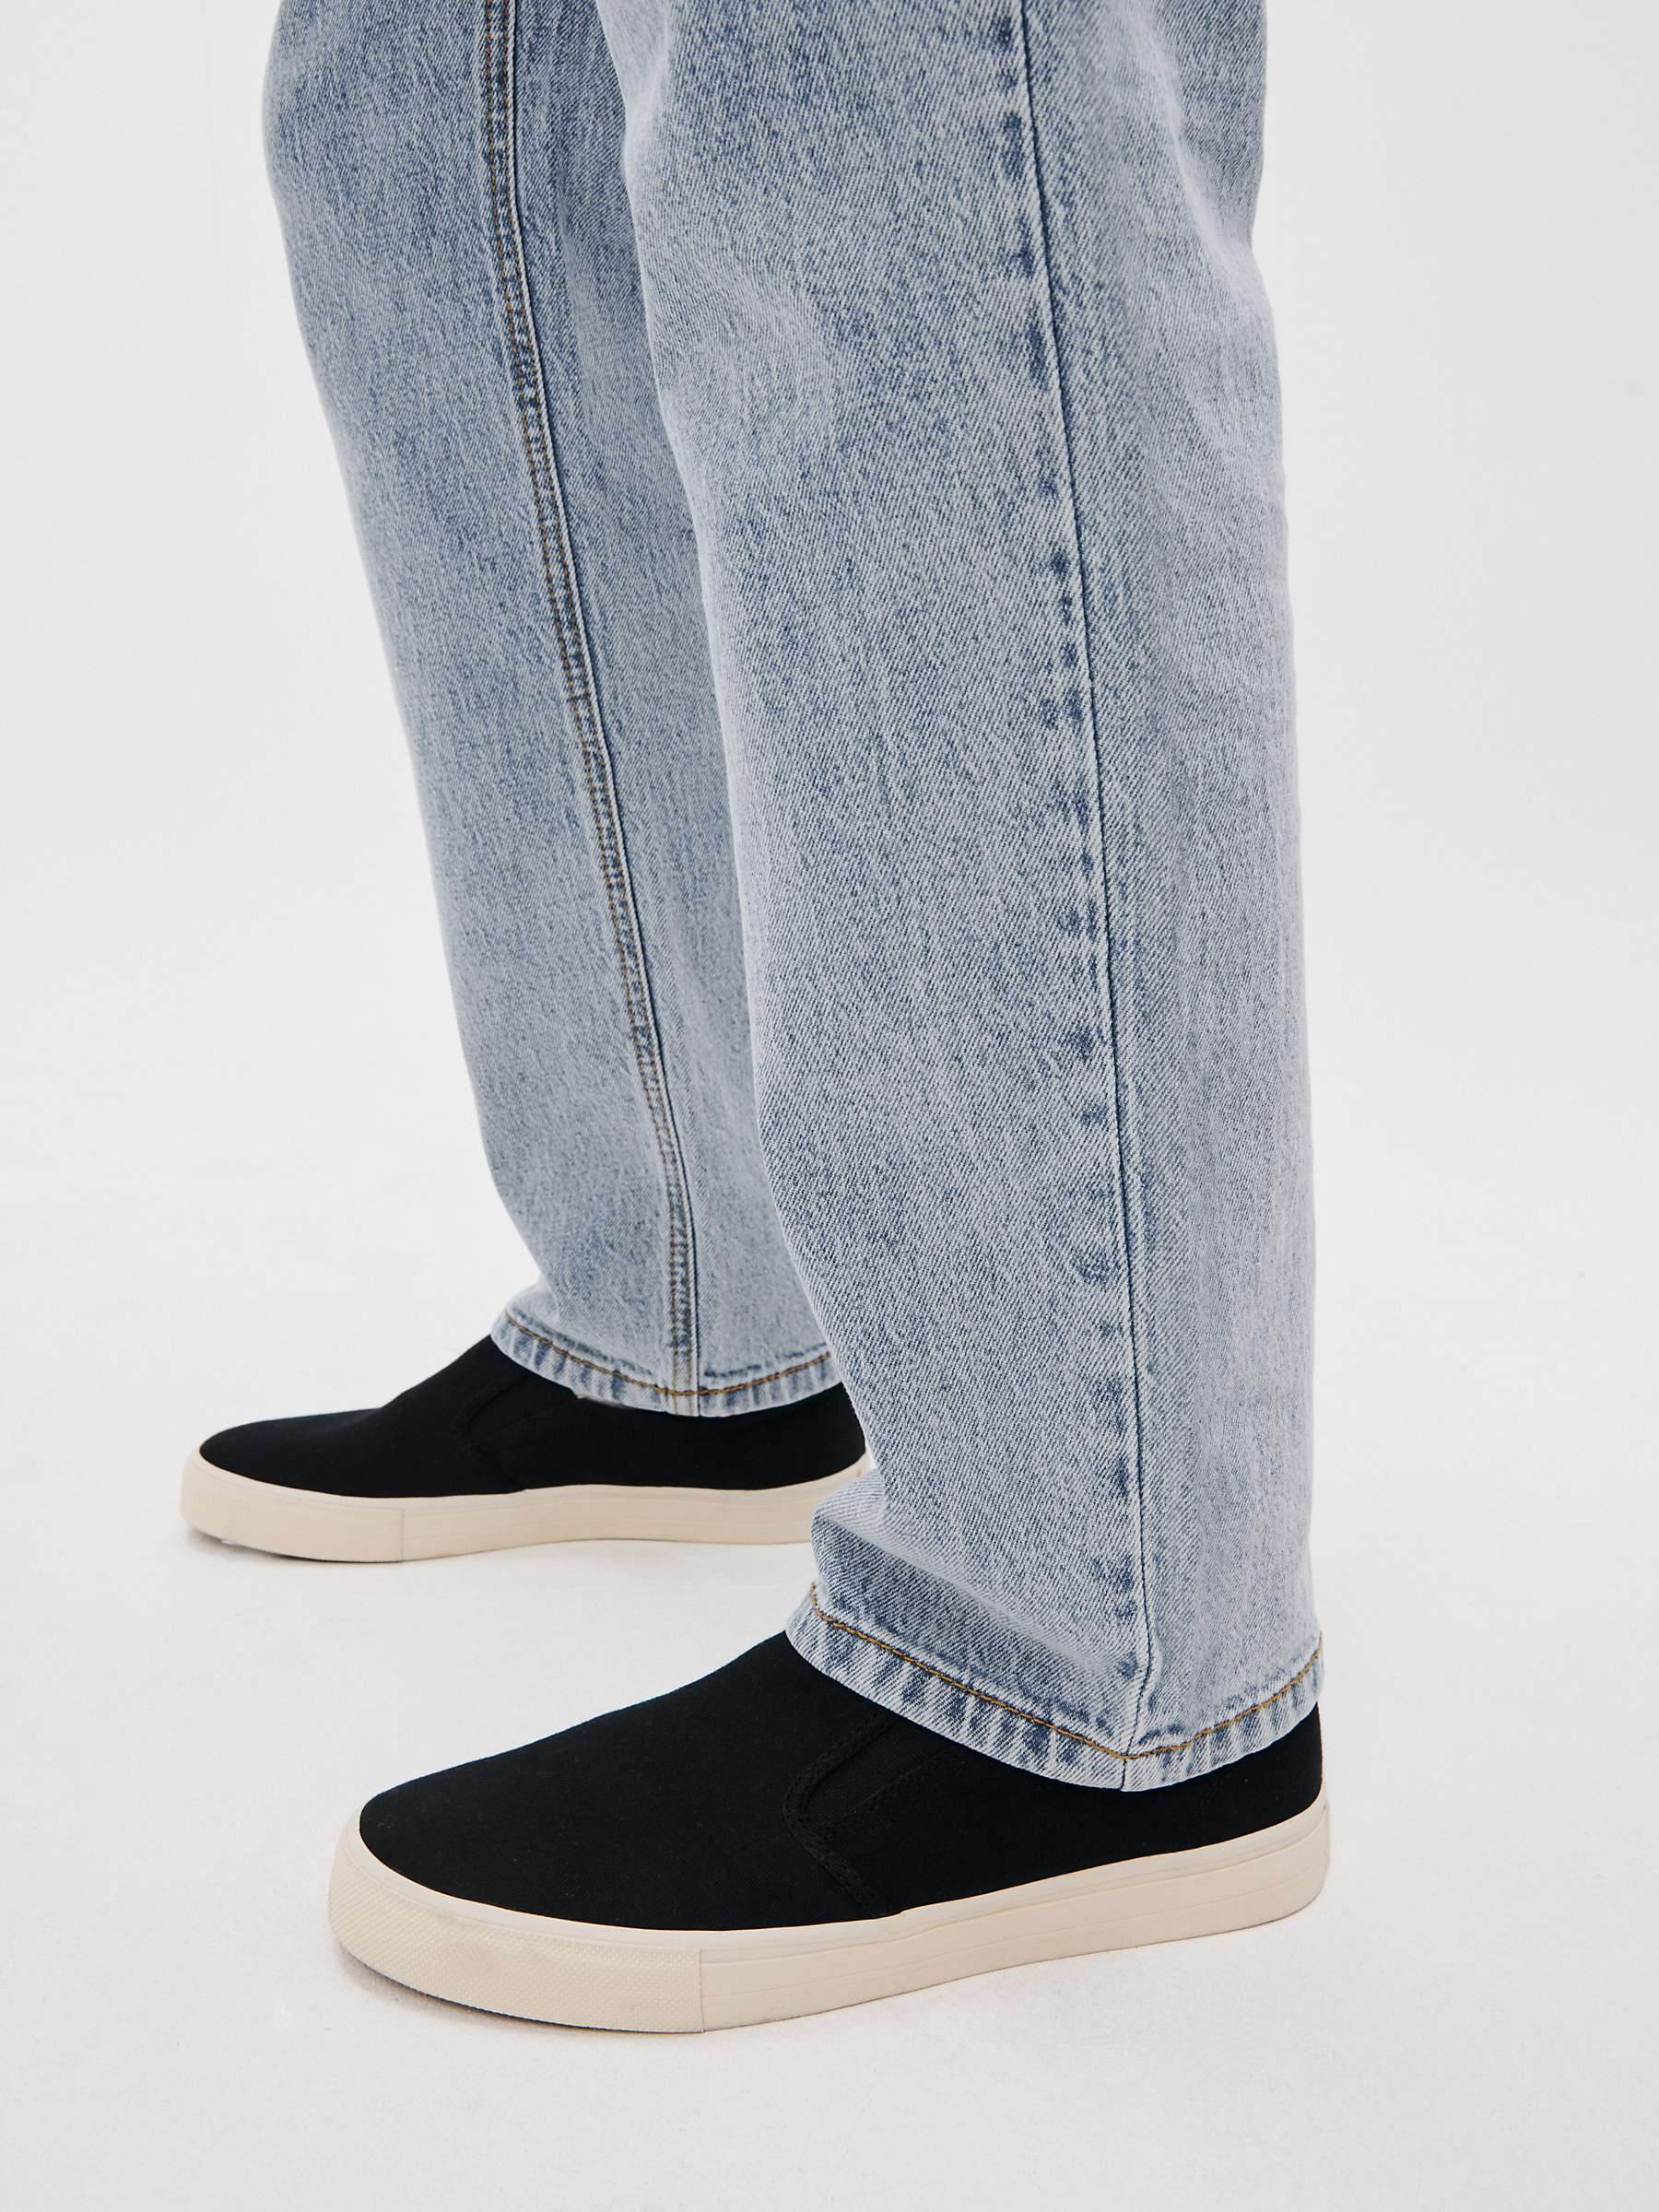 Buy John Lewis ANYDAY Straight Fit Denim Jeans, Stone Wash Online at johnlewis.com